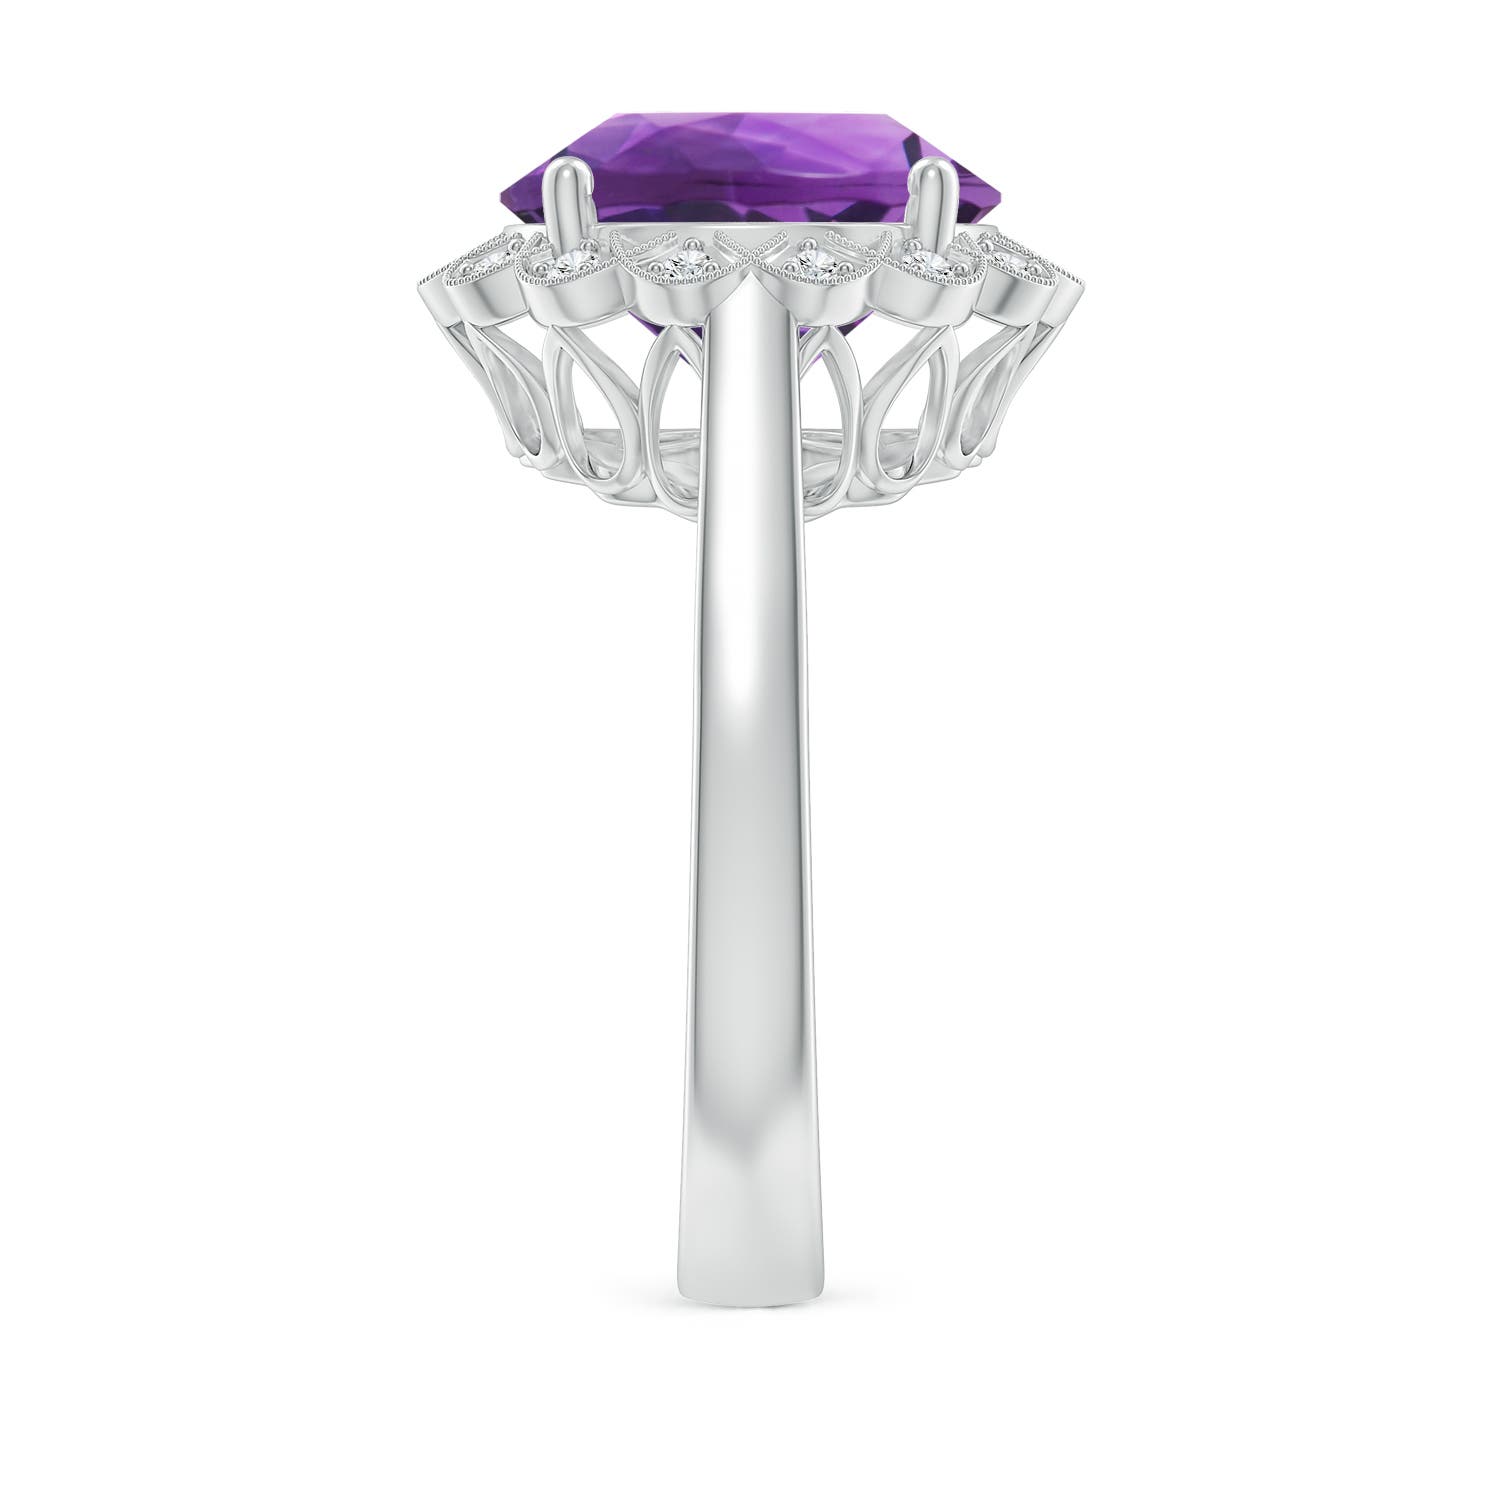 AAA- Amethyst / 4.86 CT / 14 KT White Gold